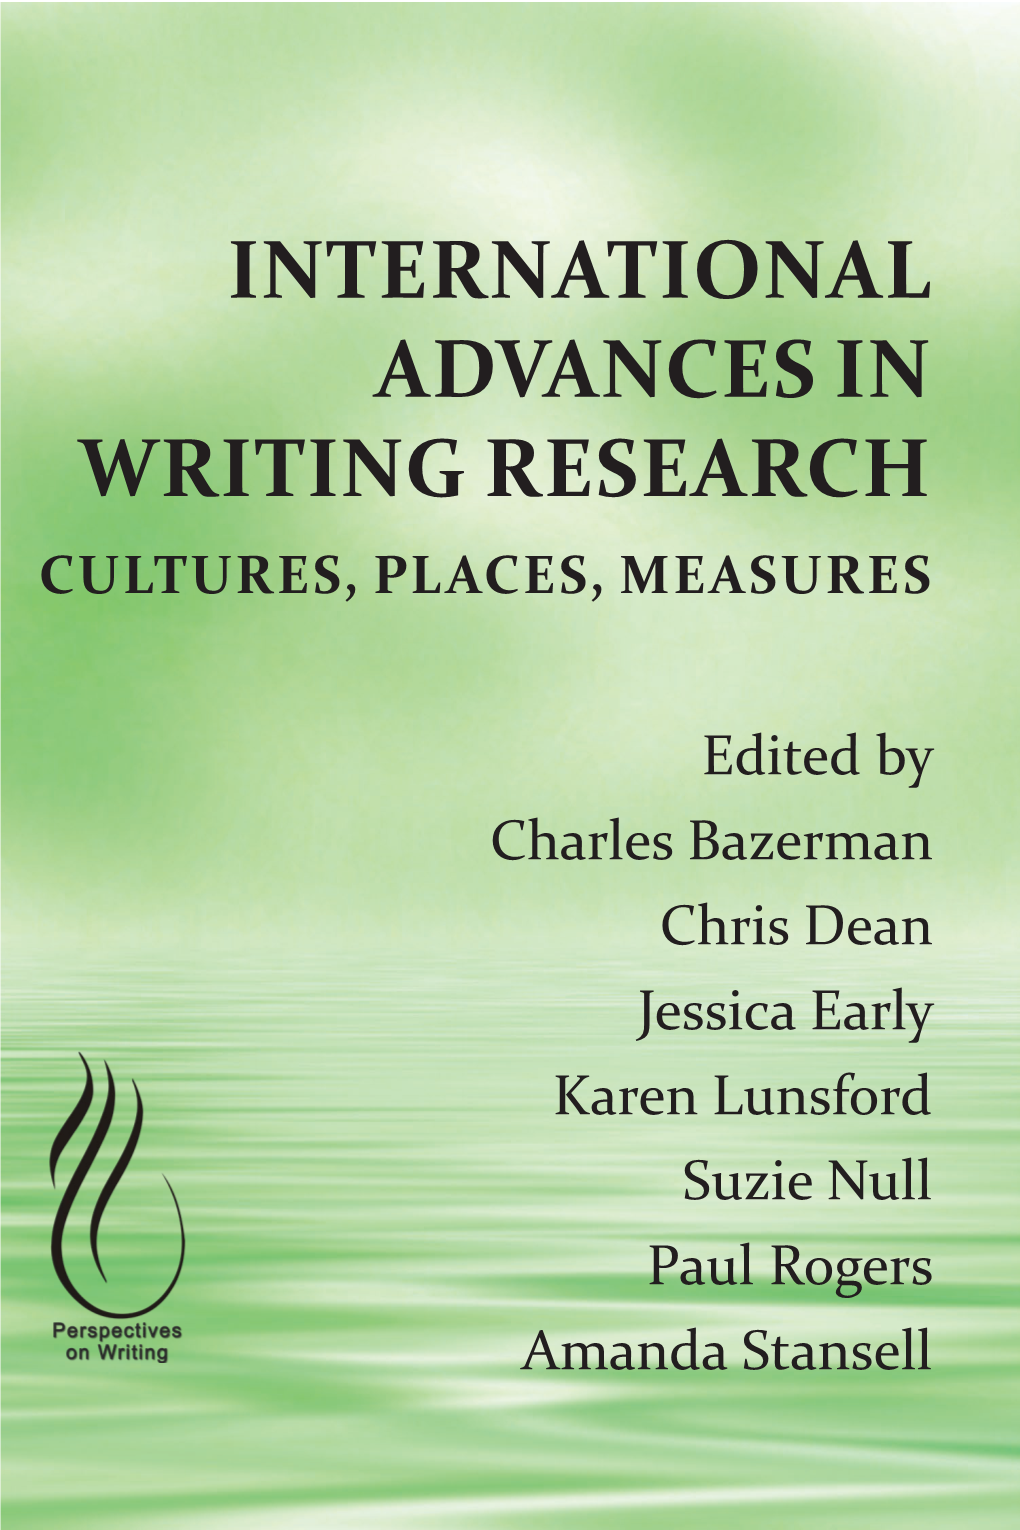 International Advances in Writing Research Cultures, Places, Measures